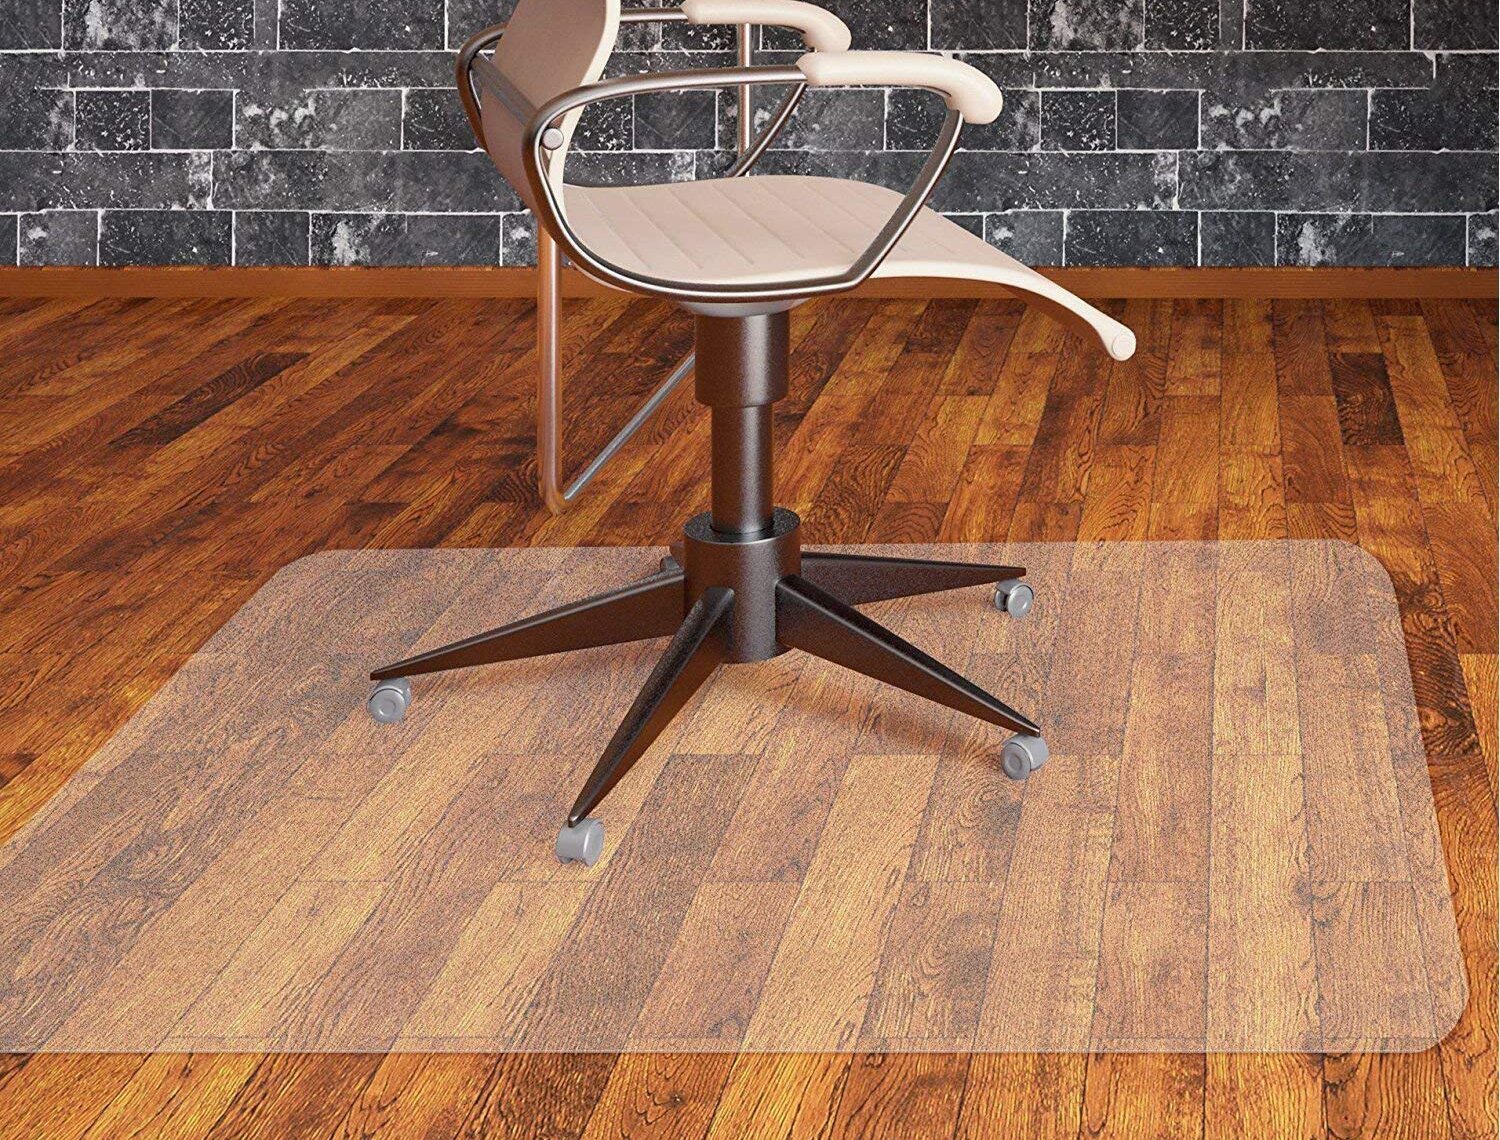 Chair Mat Office for Hardwood Floors 48 x 36 inches CM03 